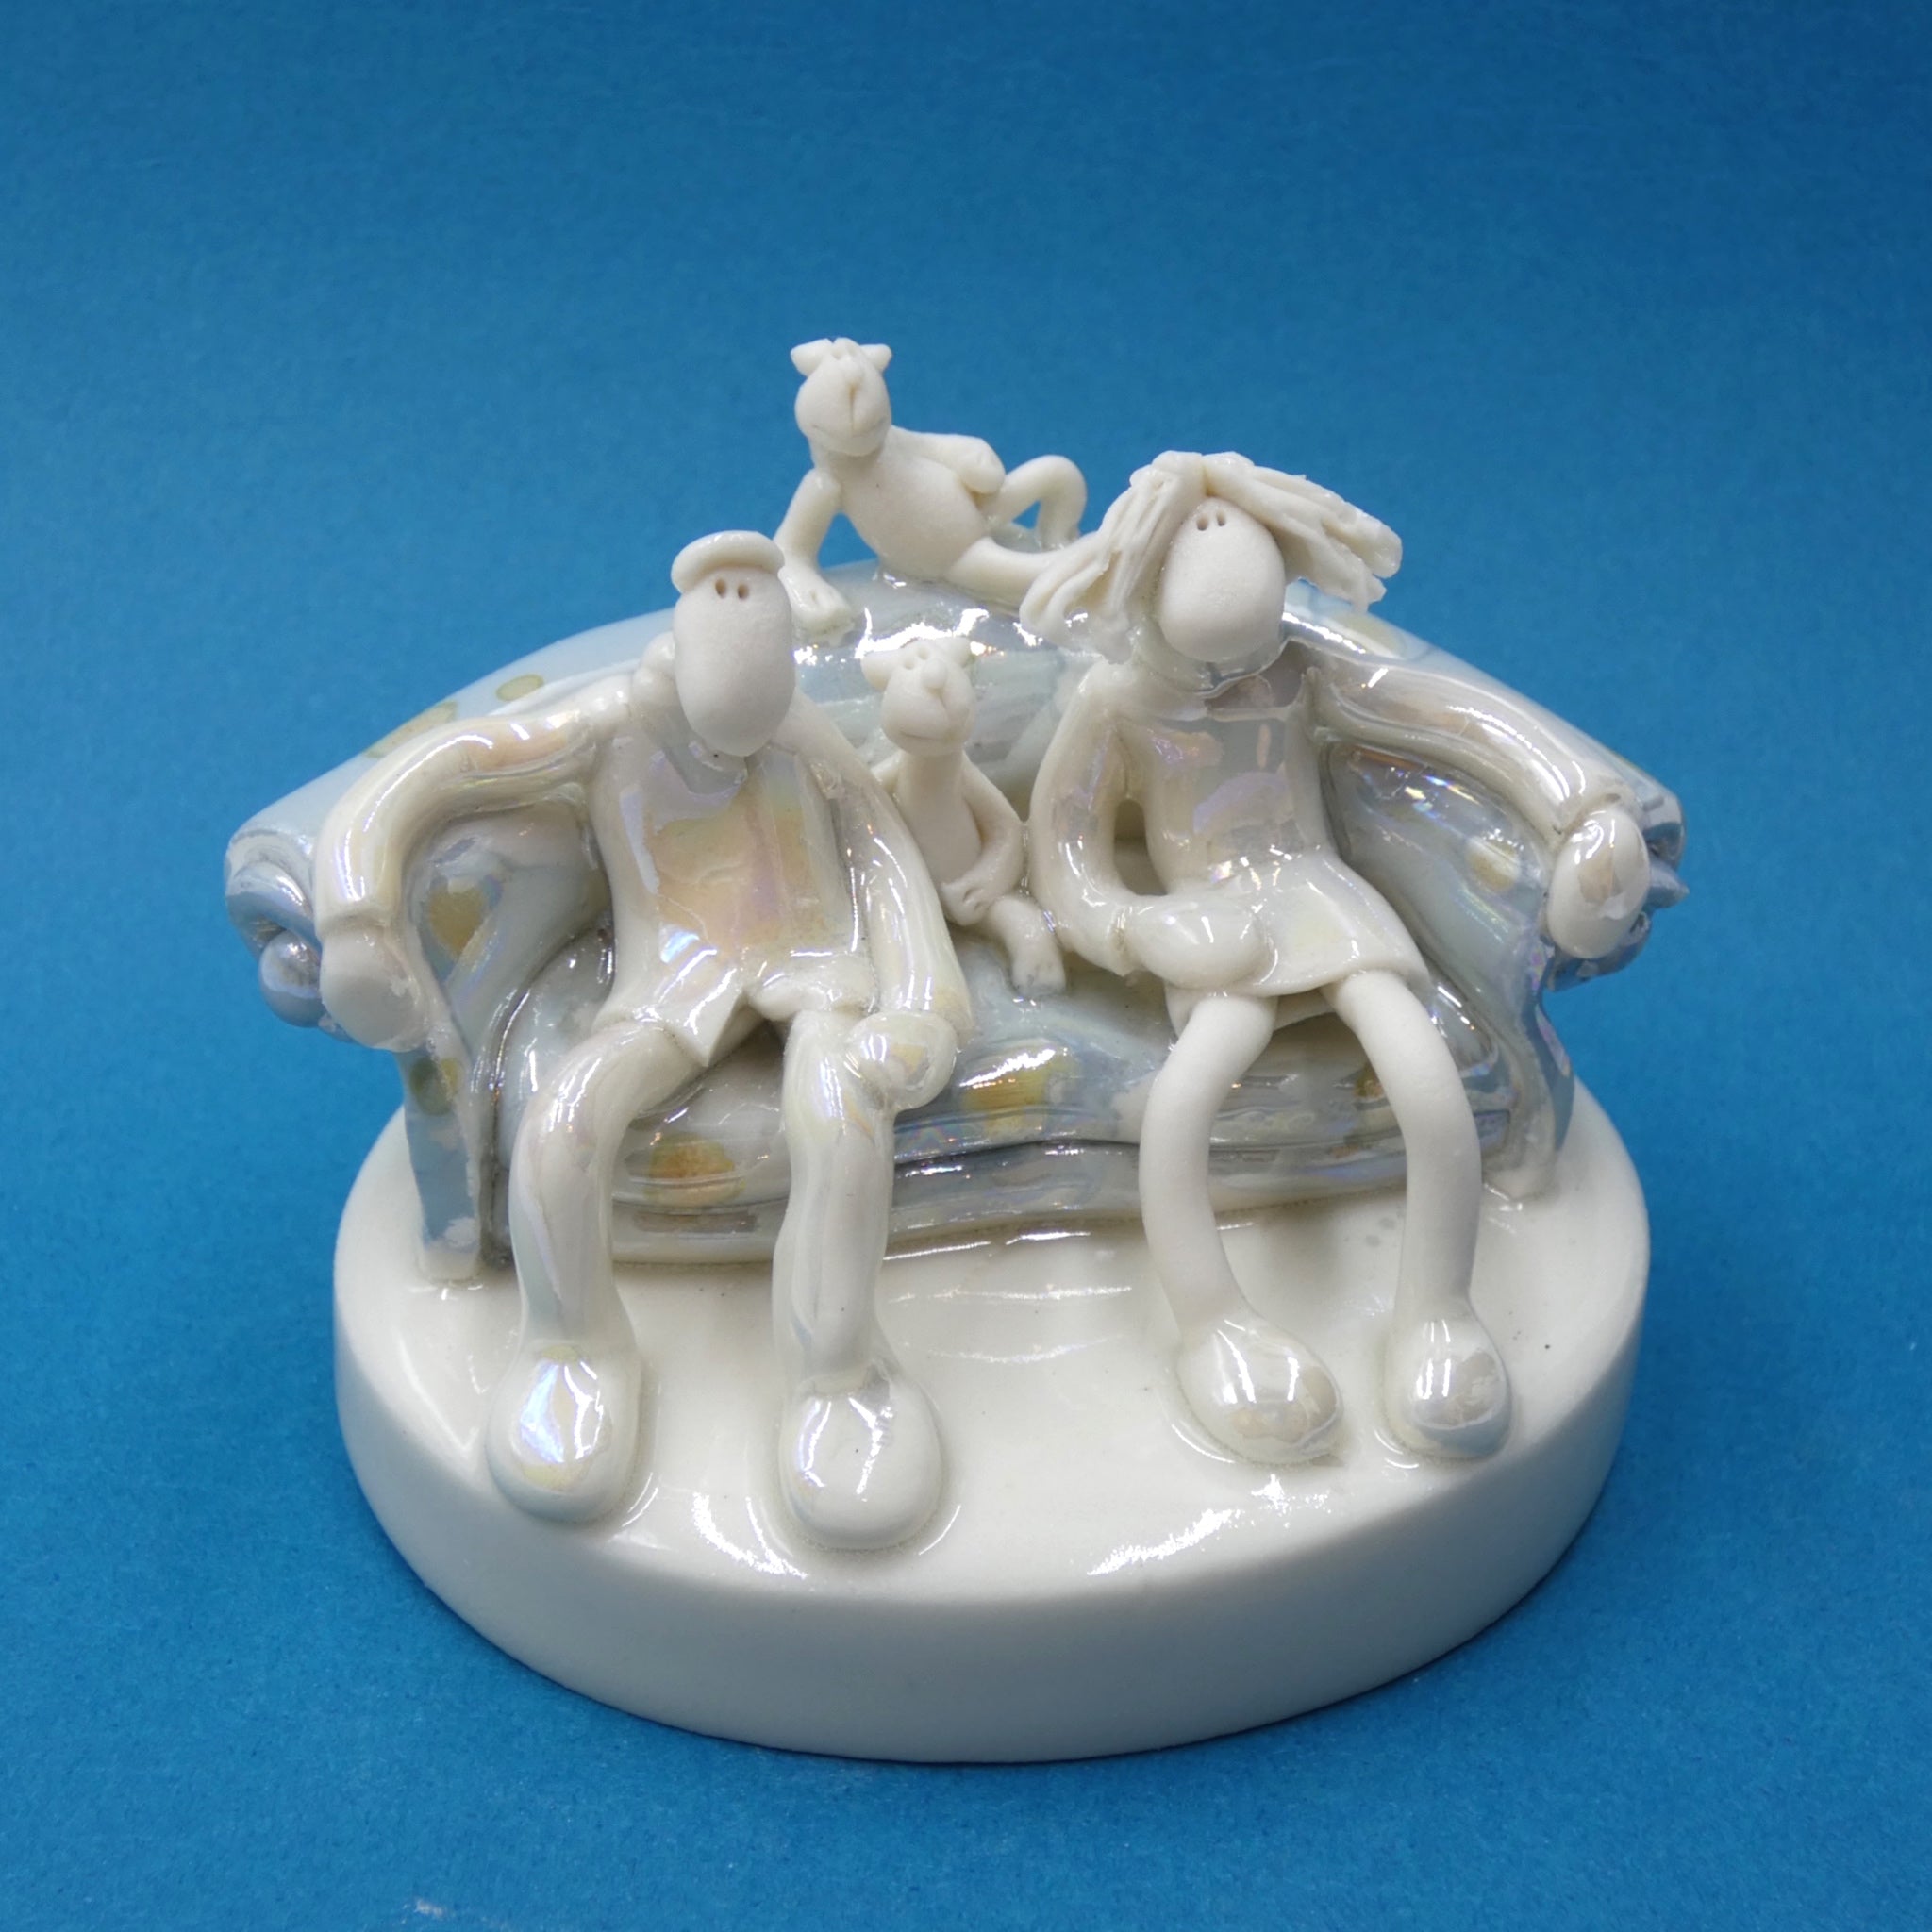 Porcelain sculpture of couple and cats on sofa by artist Andrew Bull